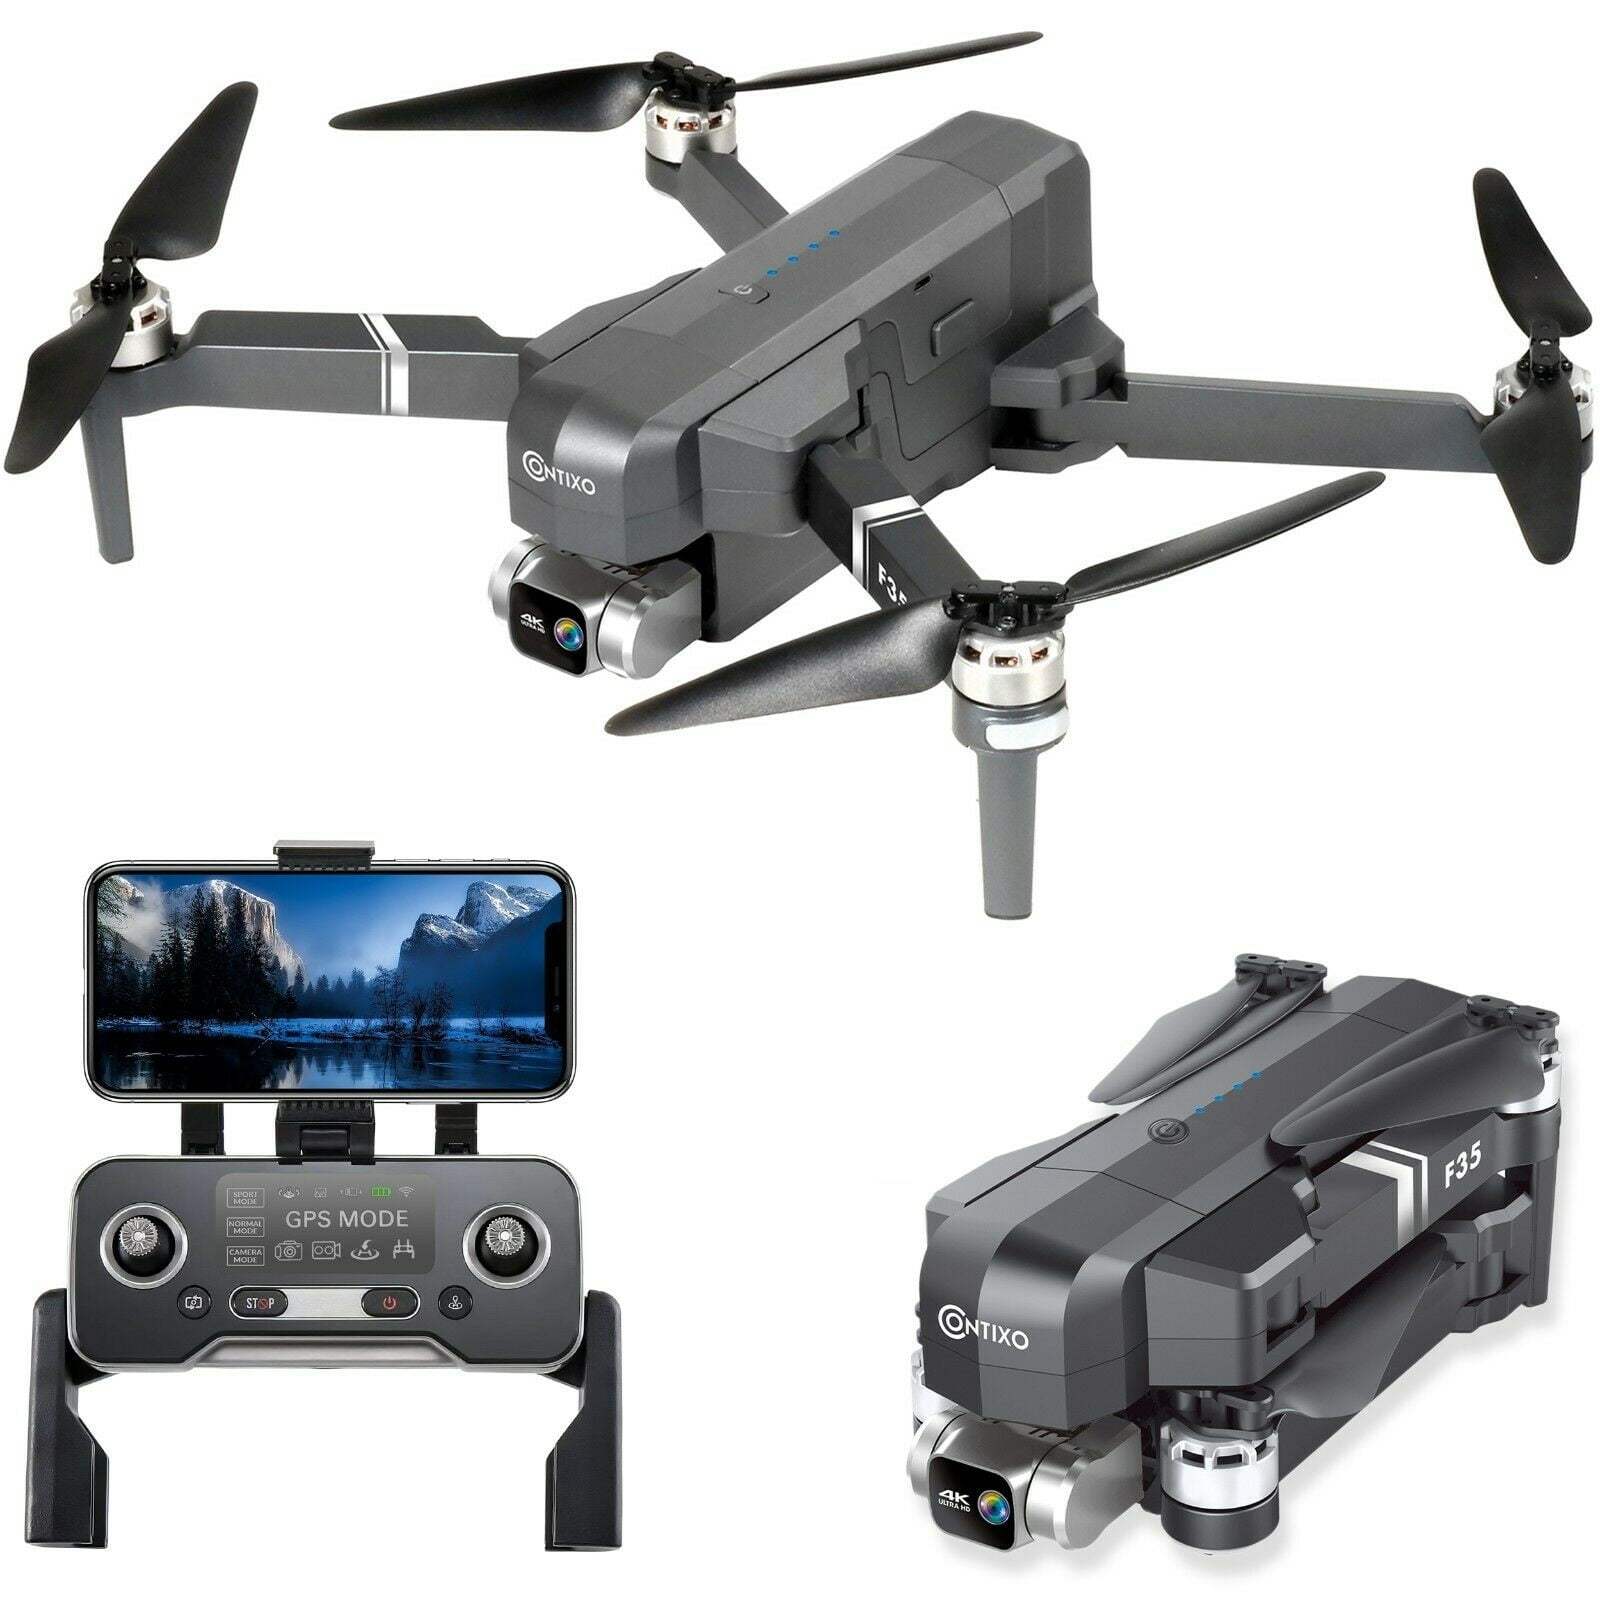 Contixo F35 GPS Drone Adults with 4K UHD Camera 2-Axis Self-Stabilizing Gimbal, 5000ft Range, Compatible, Wifi Camera, FPV View, Brushless Motor & Carrying Case - Walmart.com